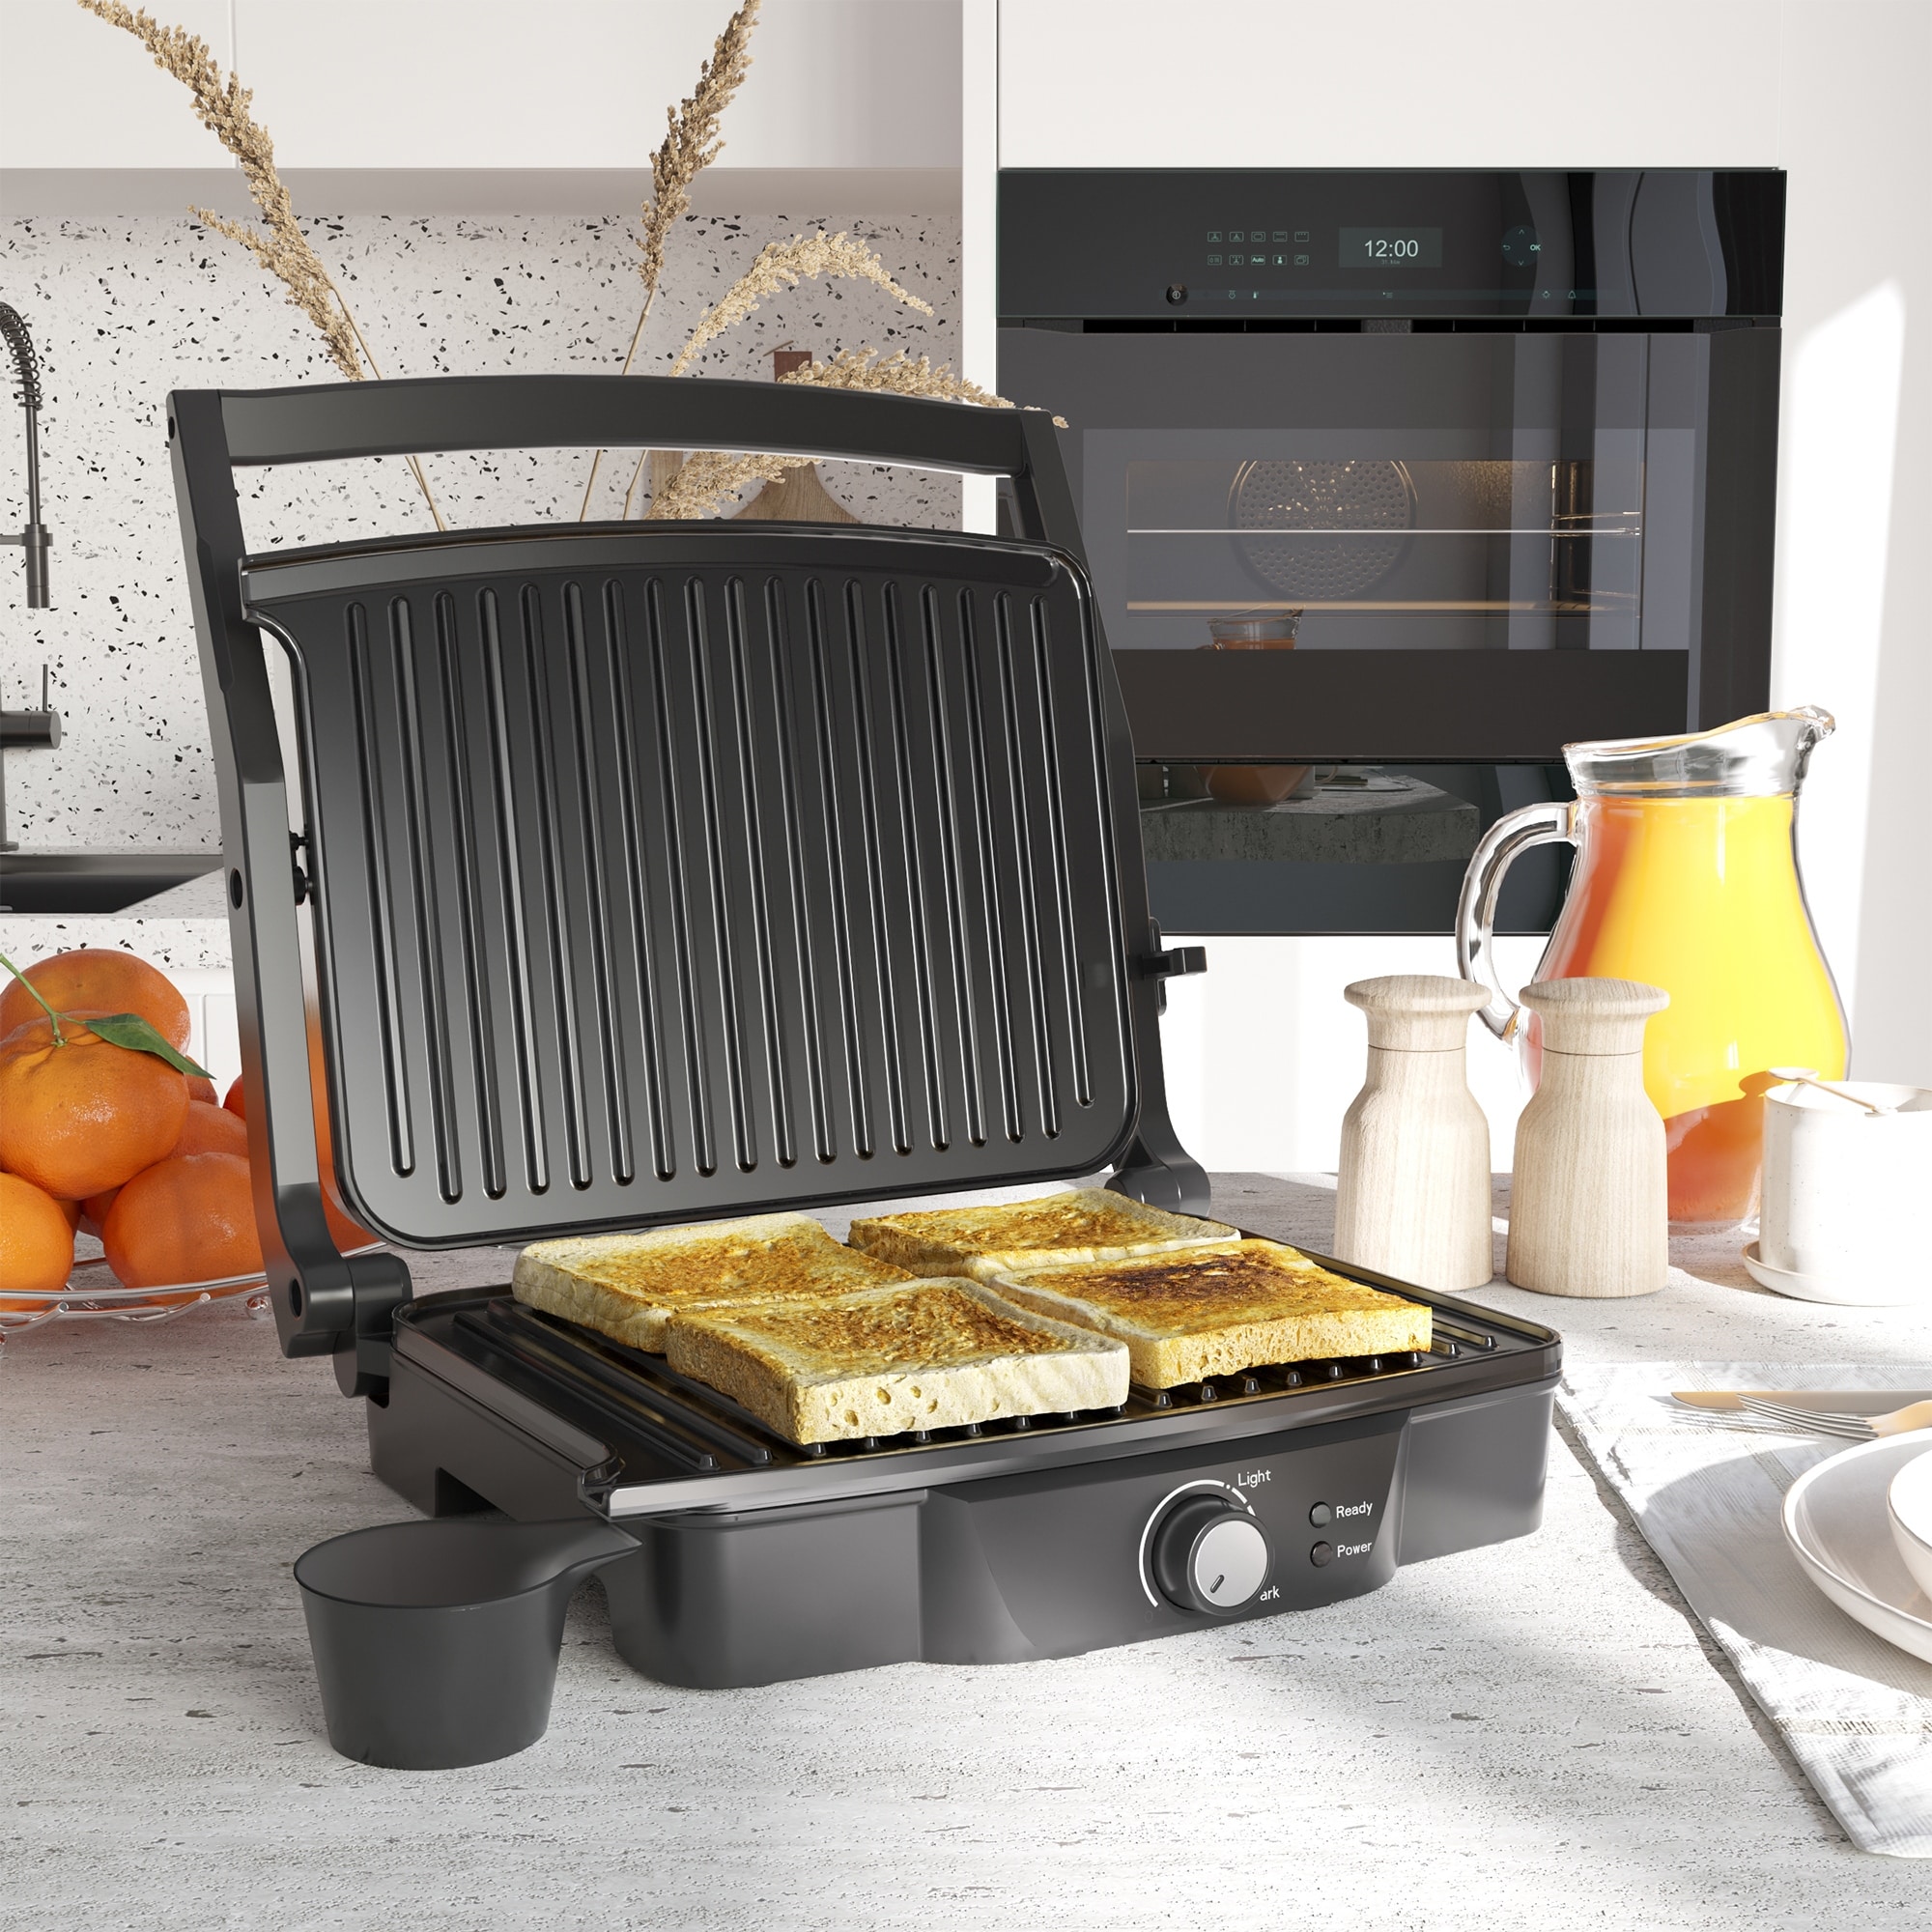 https://ak1.ostkcdn.com/images/products/is/images/direct/94c1f014b4052b5a5862cb2d494c519586bb88cb/HOMCOM-Large-Panini-Press-Sandwich-Maker-and-Grill%2C-Cooking-Gift.jpg